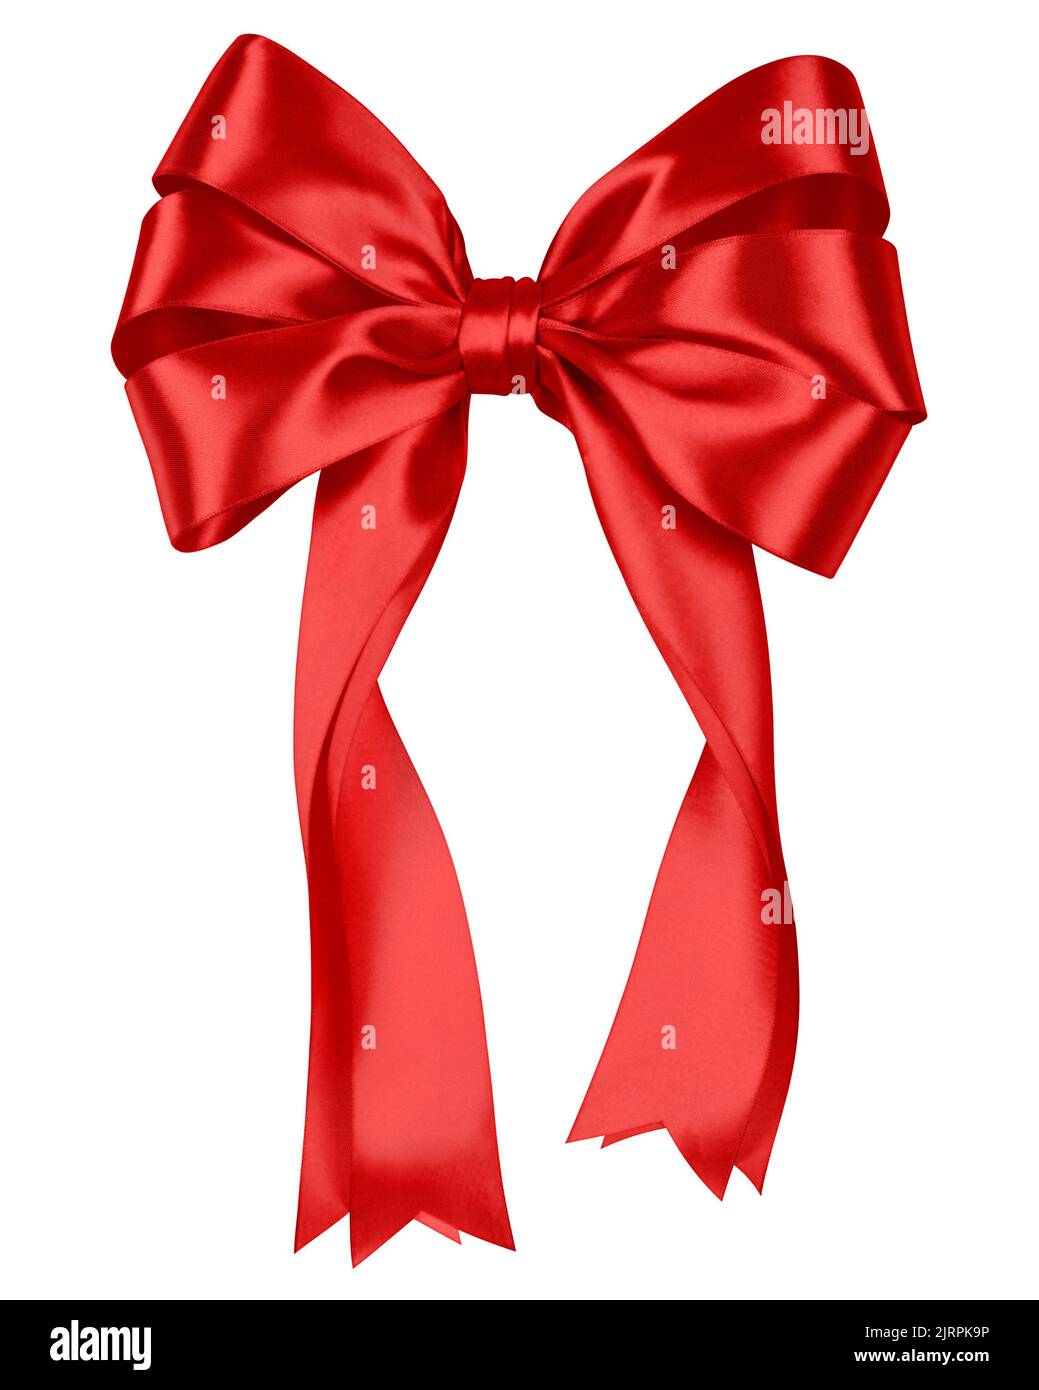 Red Silk Ribbon Frame With Bow In The Corner Isolated On White Background  Stock Photo, Picture and Royalty Free Image. Image 114595827.